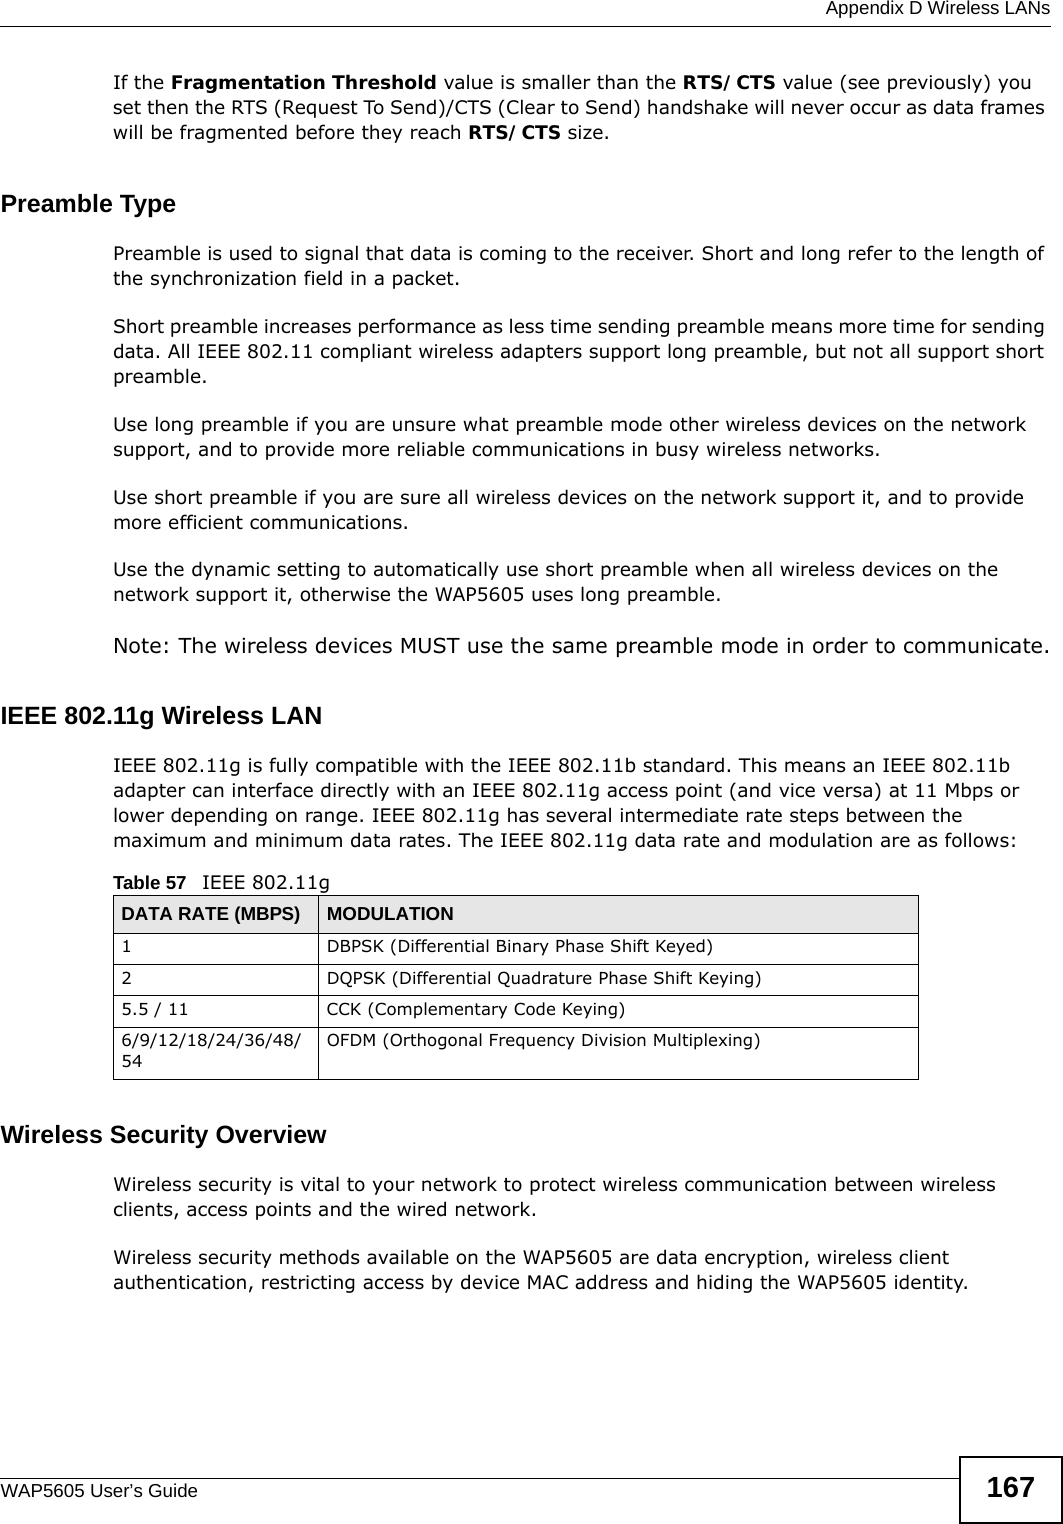  Appendix D Wireless LANsWAP5605 User’s Guide 167If the Fragmentation Threshold value is smaller than the RTS/CTS value (see previously) you set then the RTS (Request To Send)/CTS (Clear to Send) handshake will never occur as data frames will be fragmented before they reach RTS/CTS size.Preamble TypePreamble is used to signal that data is coming to the receiver. Short and long refer to the length of the synchronization field in a packet.Short preamble increases performance as less time sending preamble means more time for sending data. All IEEE 802.11 compliant wireless adapters support long preamble, but not all support short preamble. Use long preamble if you are unsure what preamble mode other wireless devices on the network support, and to provide more reliable communications in busy wireless networks. Use short preamble if you are sure all wireless devices on the network support it, and to provide more efficient communications.Use the dynamic setting to automatically use short preamble when all wireless devices on the network support it, otherwise the WAP5605 uses long preamble.Note: The wireless devices MUST use the same preamble mode in order to communicate.IEEE 802.11g Wireless LANIEEE 802.11g is fully compatible with the IEEE 802.11b standard. This means an IEEE 802.11b adapter can interface directly with an IEEE 802.11g access point (and vice versa) at 11 Mbps or lower depending on range. IEEE 802.11g has several intermediate rate steps between the maximum and minimum data rates. The IEEE 802.11g data rate and modulation are as follows:Wireless Security OverviewWireless security is vital to your network to protect wireless communication between wireless clients, access points and the wired network.Wireless security methods available on the WAP5605 are data encryption, wireless client authentication, restricting access by device MAC address and hiding the WAP5605 identity.Table 57   IEEE 802.11gDATA RATE (MBPS) MODULATION1 DBPSK (Differential Binary Phase Shift Keyed)2 DQPSK (Differential Quadrature Phase Shift Keying)5.5 / 11 CCK (Complementary Code Keying) 6/9/12/18/24/36/48/54OFDM (Orthogonal Frequency Division Multiplexing) 